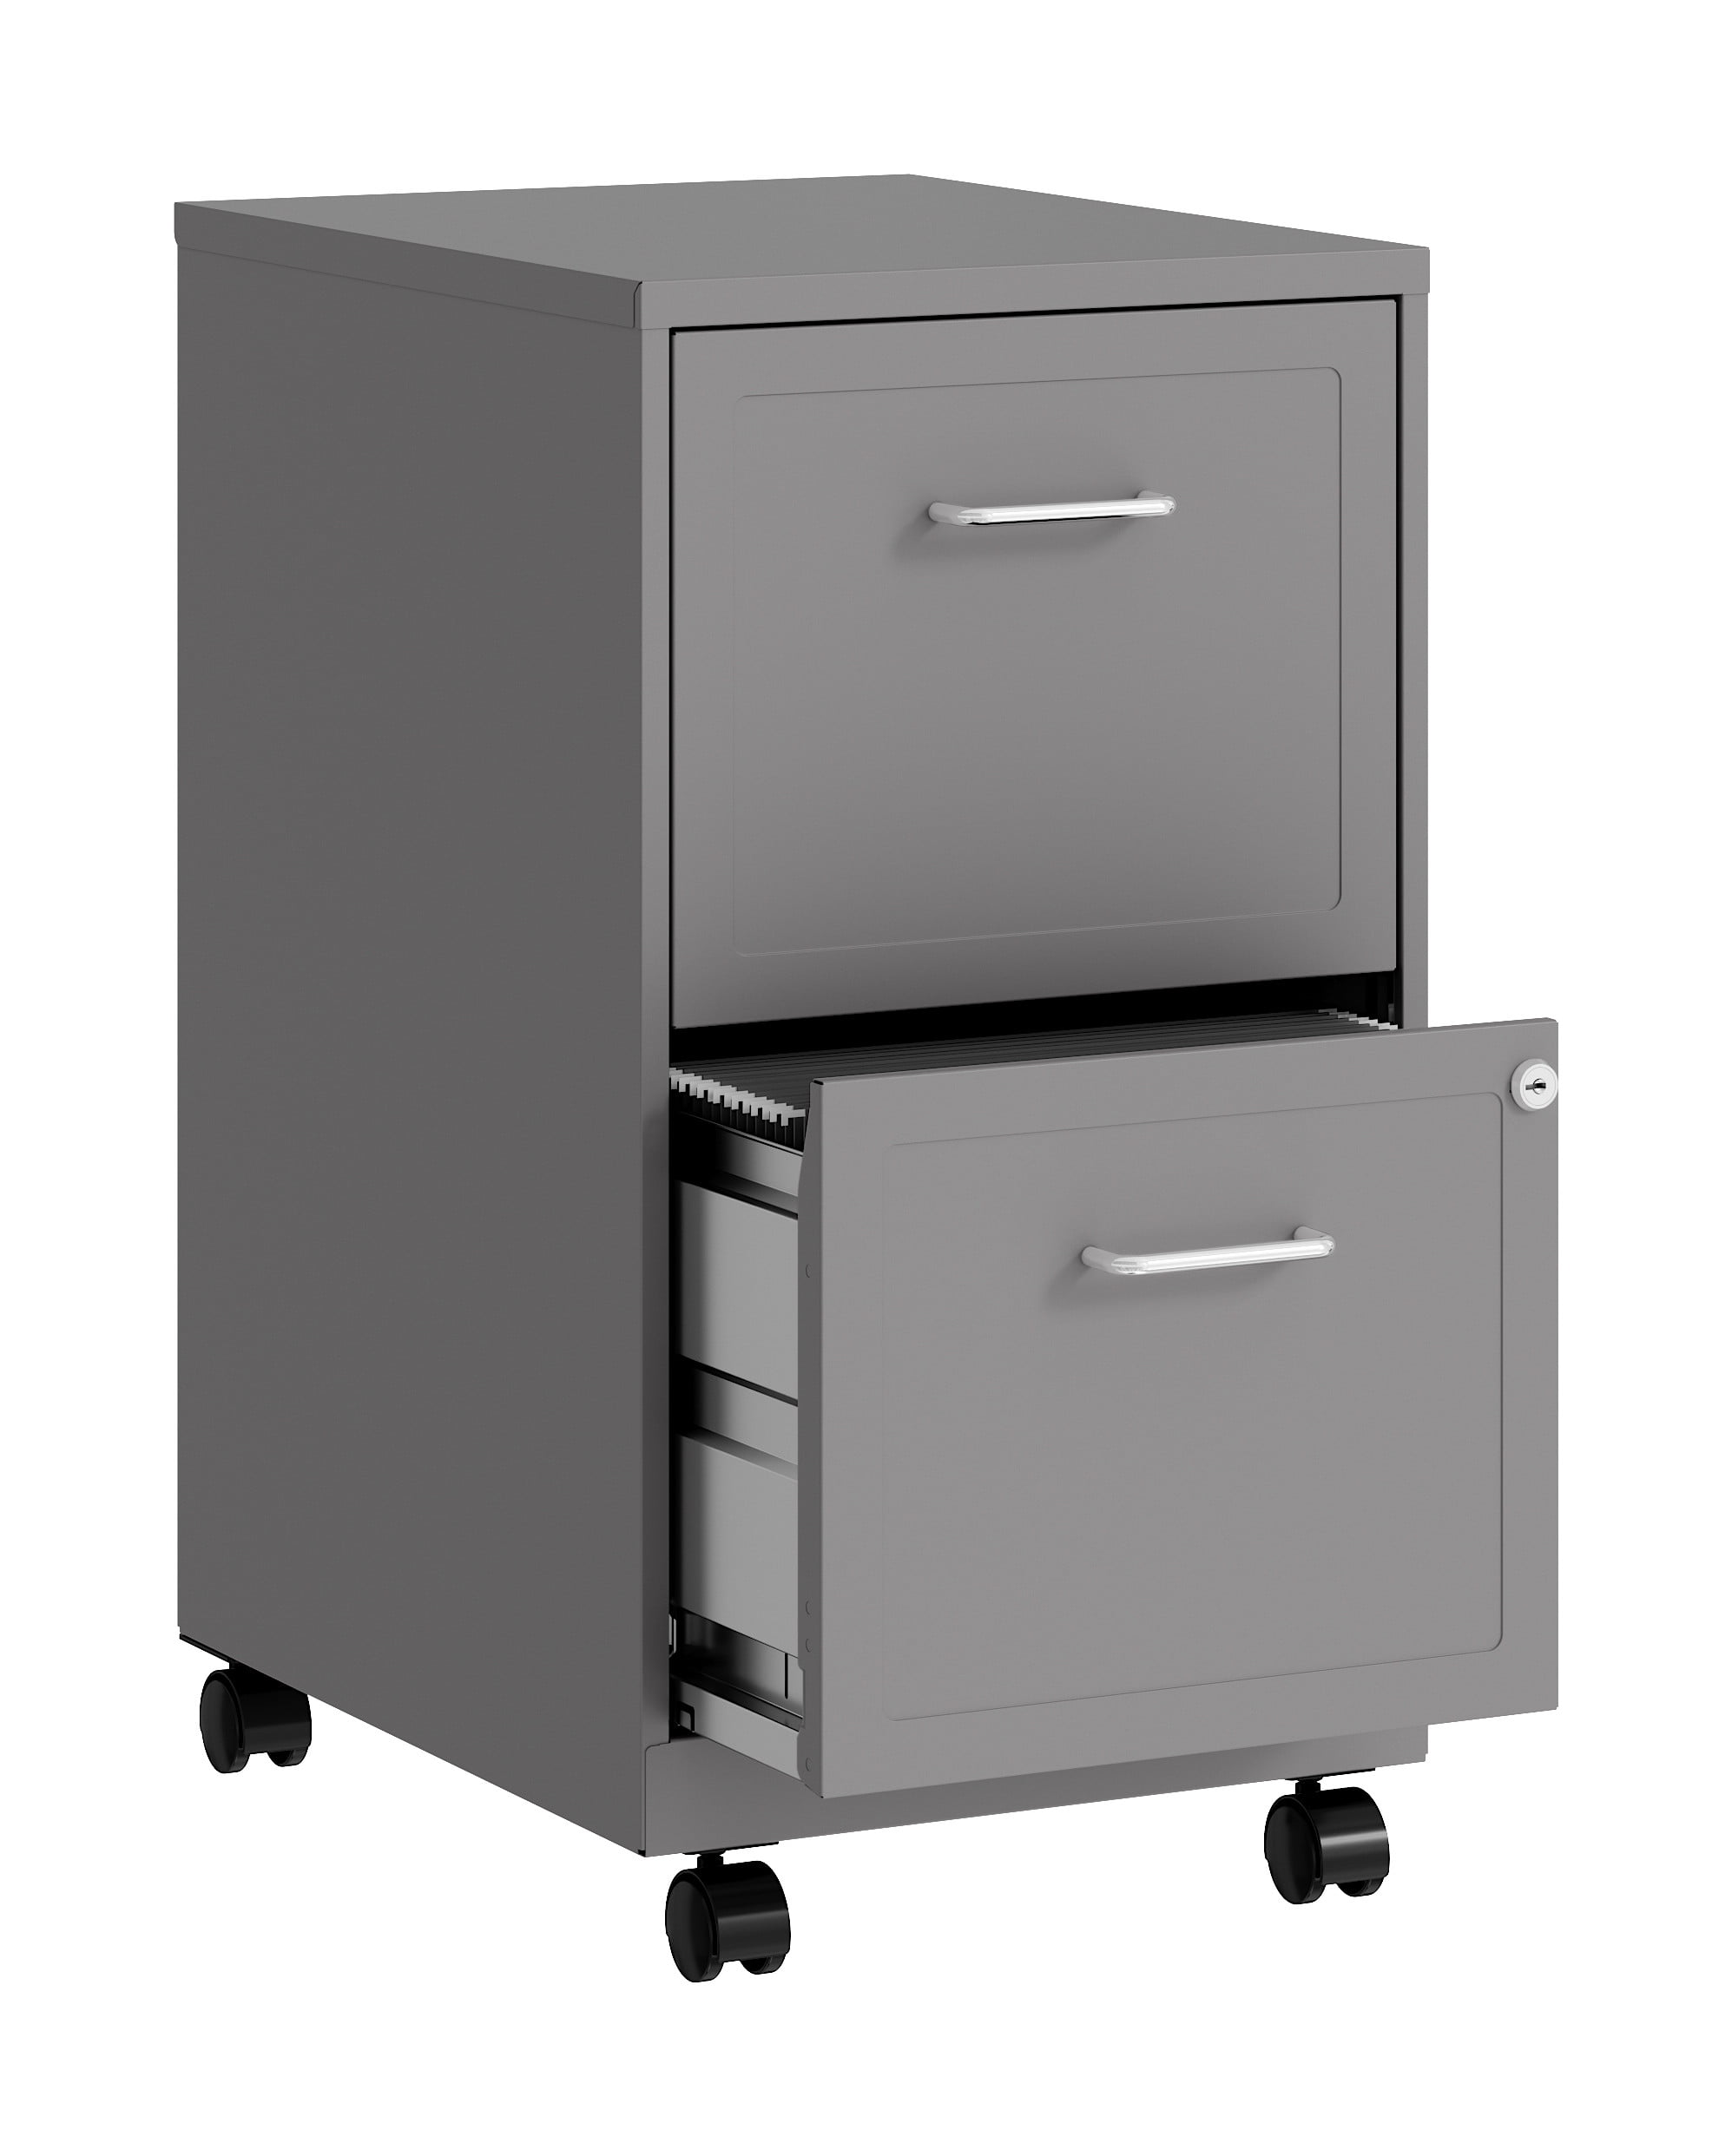 Lorell Space Solutions 18" 2 Drawer Mobile Vertical File Cabinet in Silver - image 5 of 15